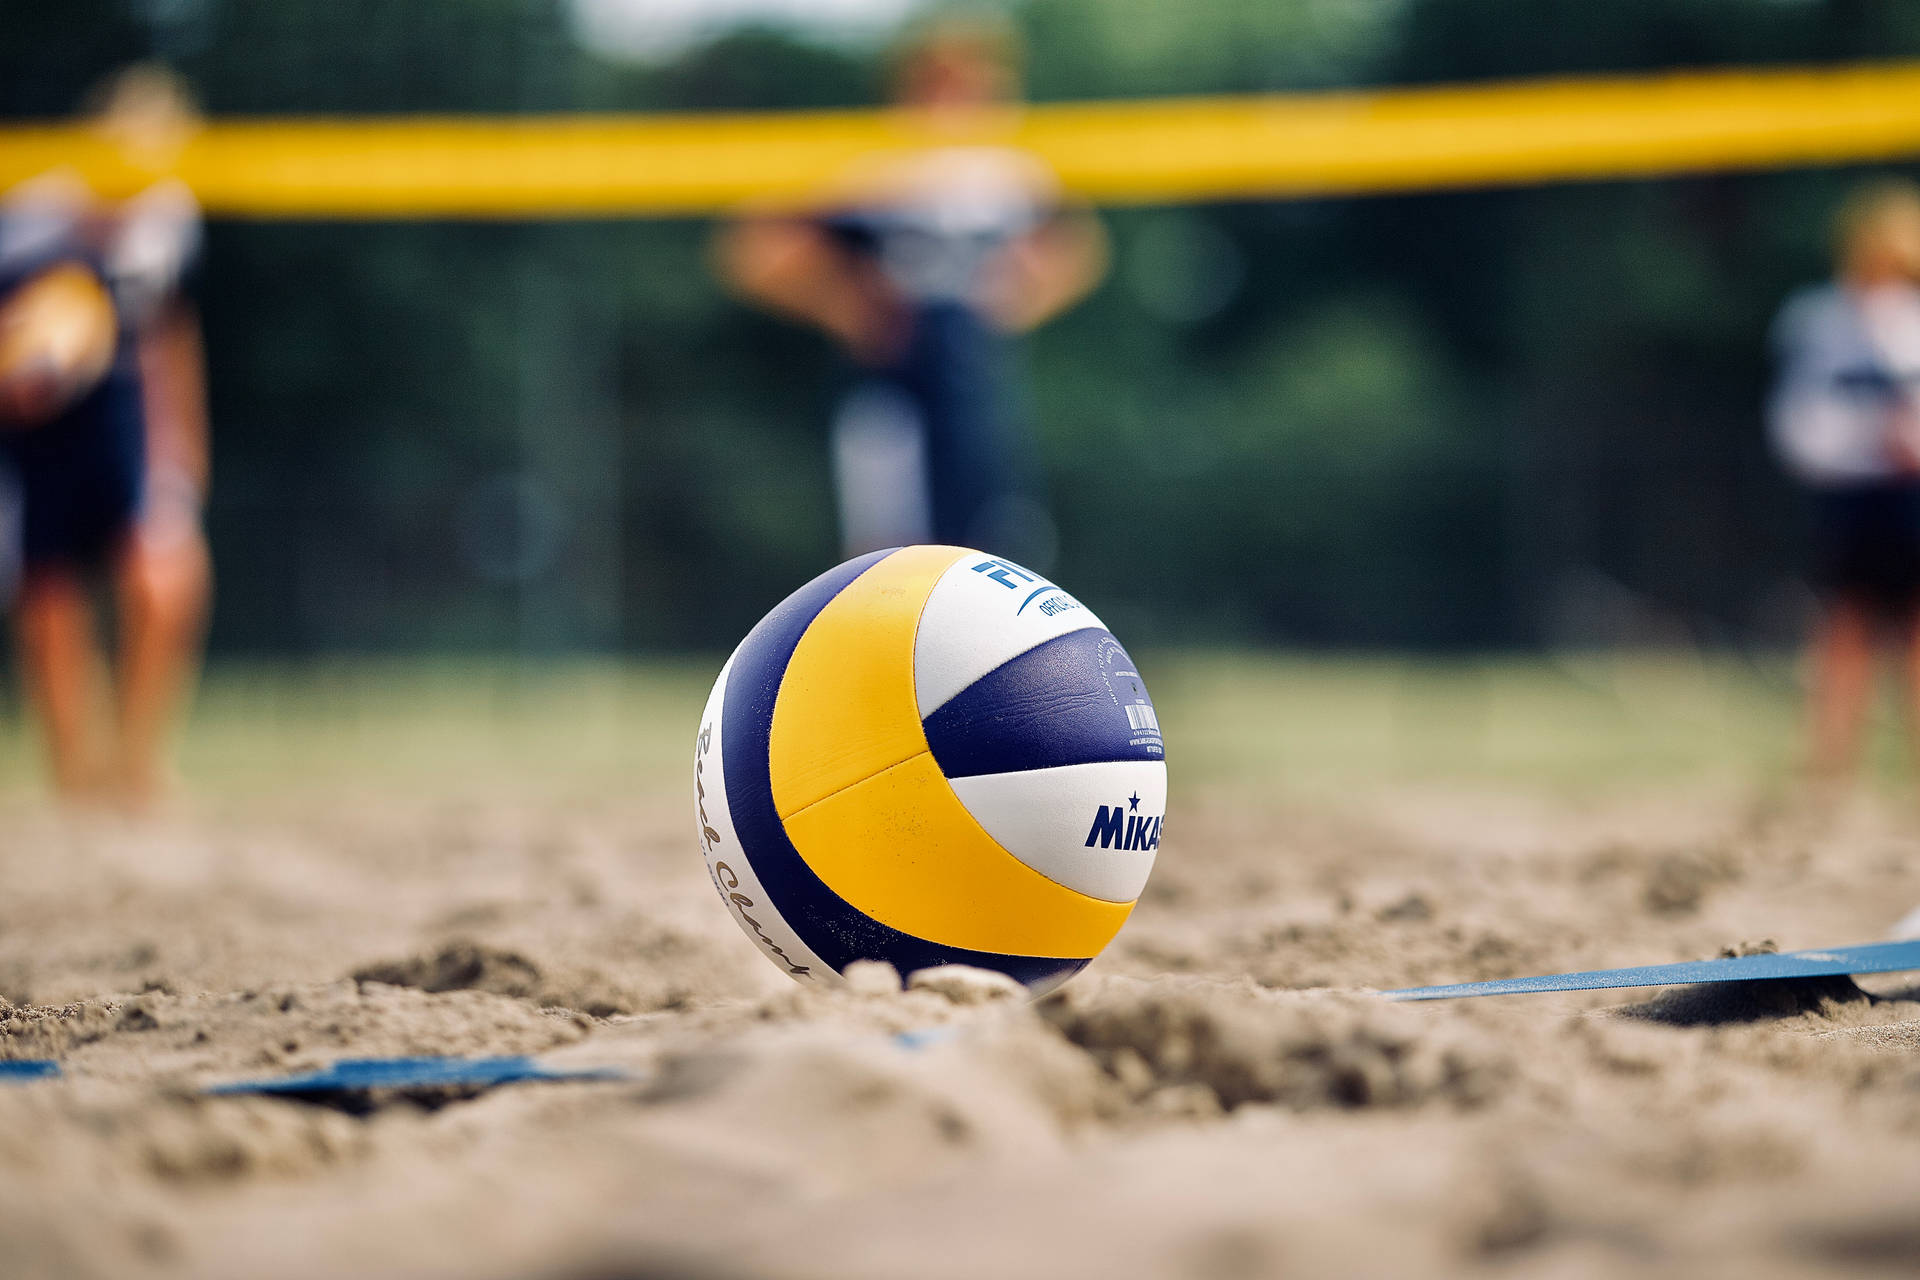 Volleyball 6240X4160 Wallpaper and Background Image